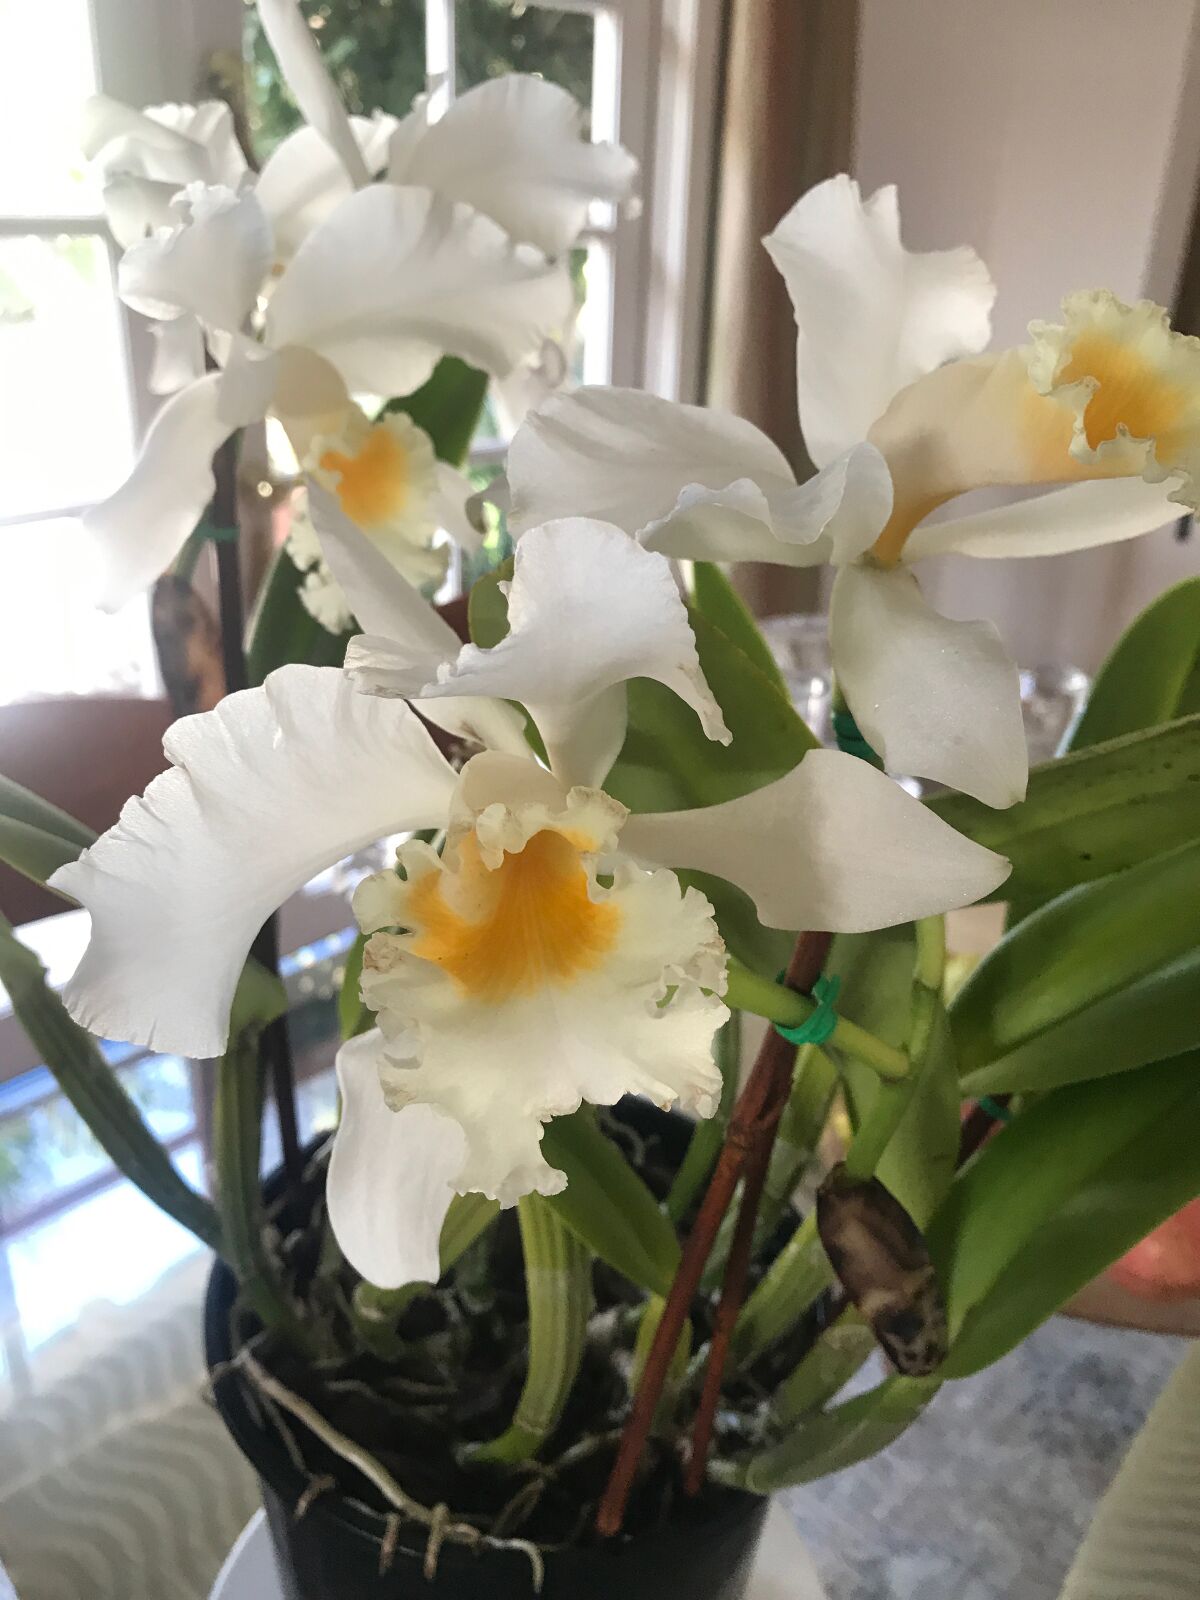 Cattleya orchids, known as “Queen of the Orchids,” produce large, fragrant flowers.